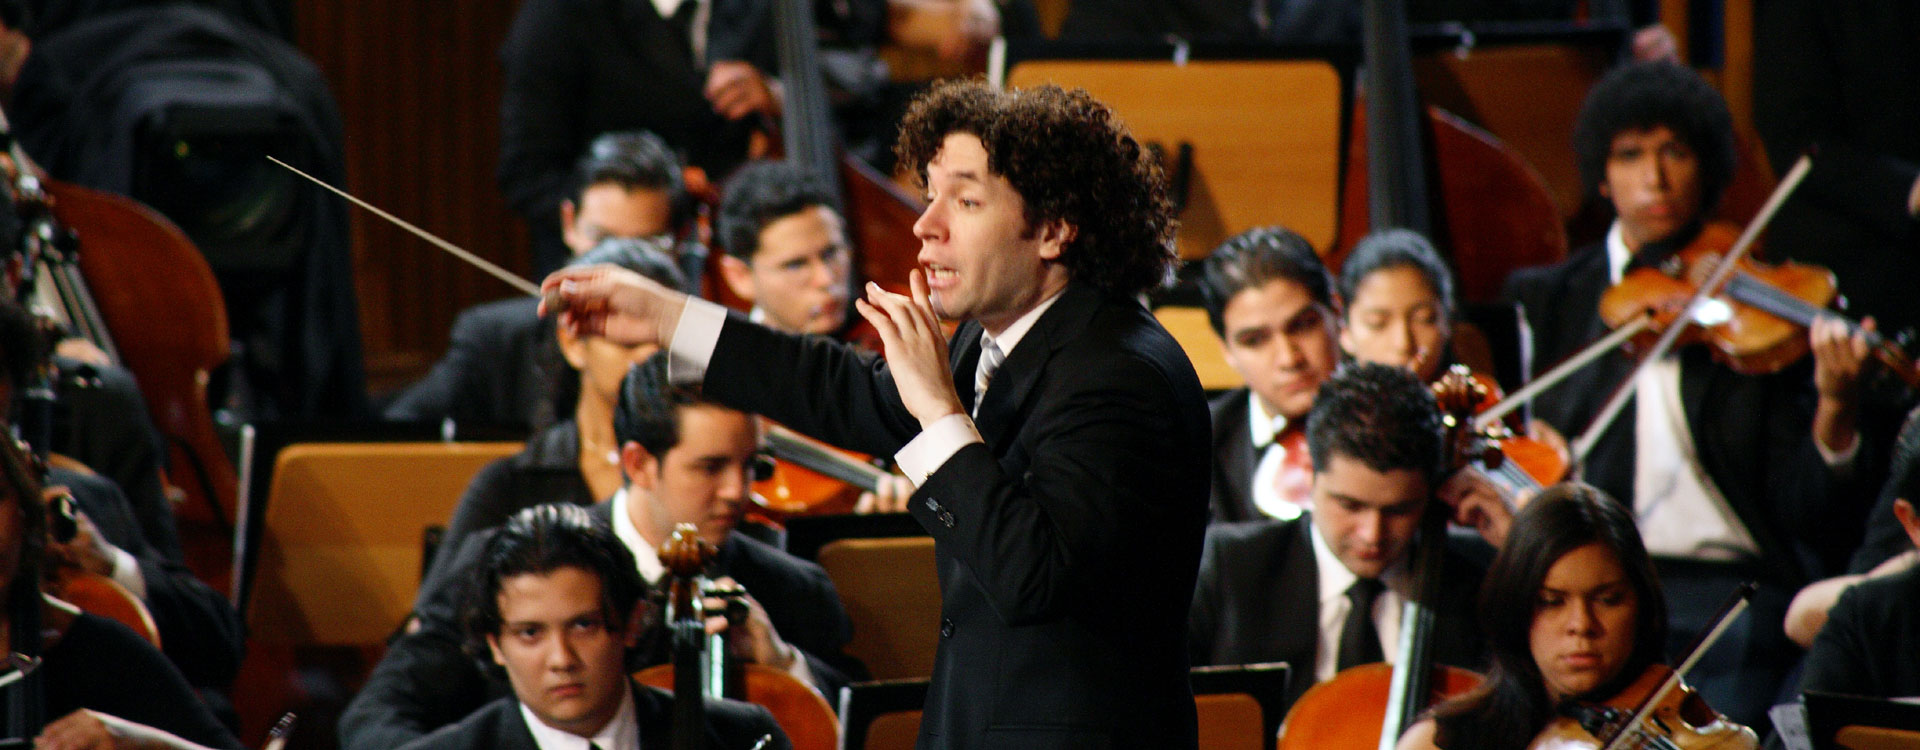 The Simón Bolívar Youth Orchestra at the Beethoven Festival 2007